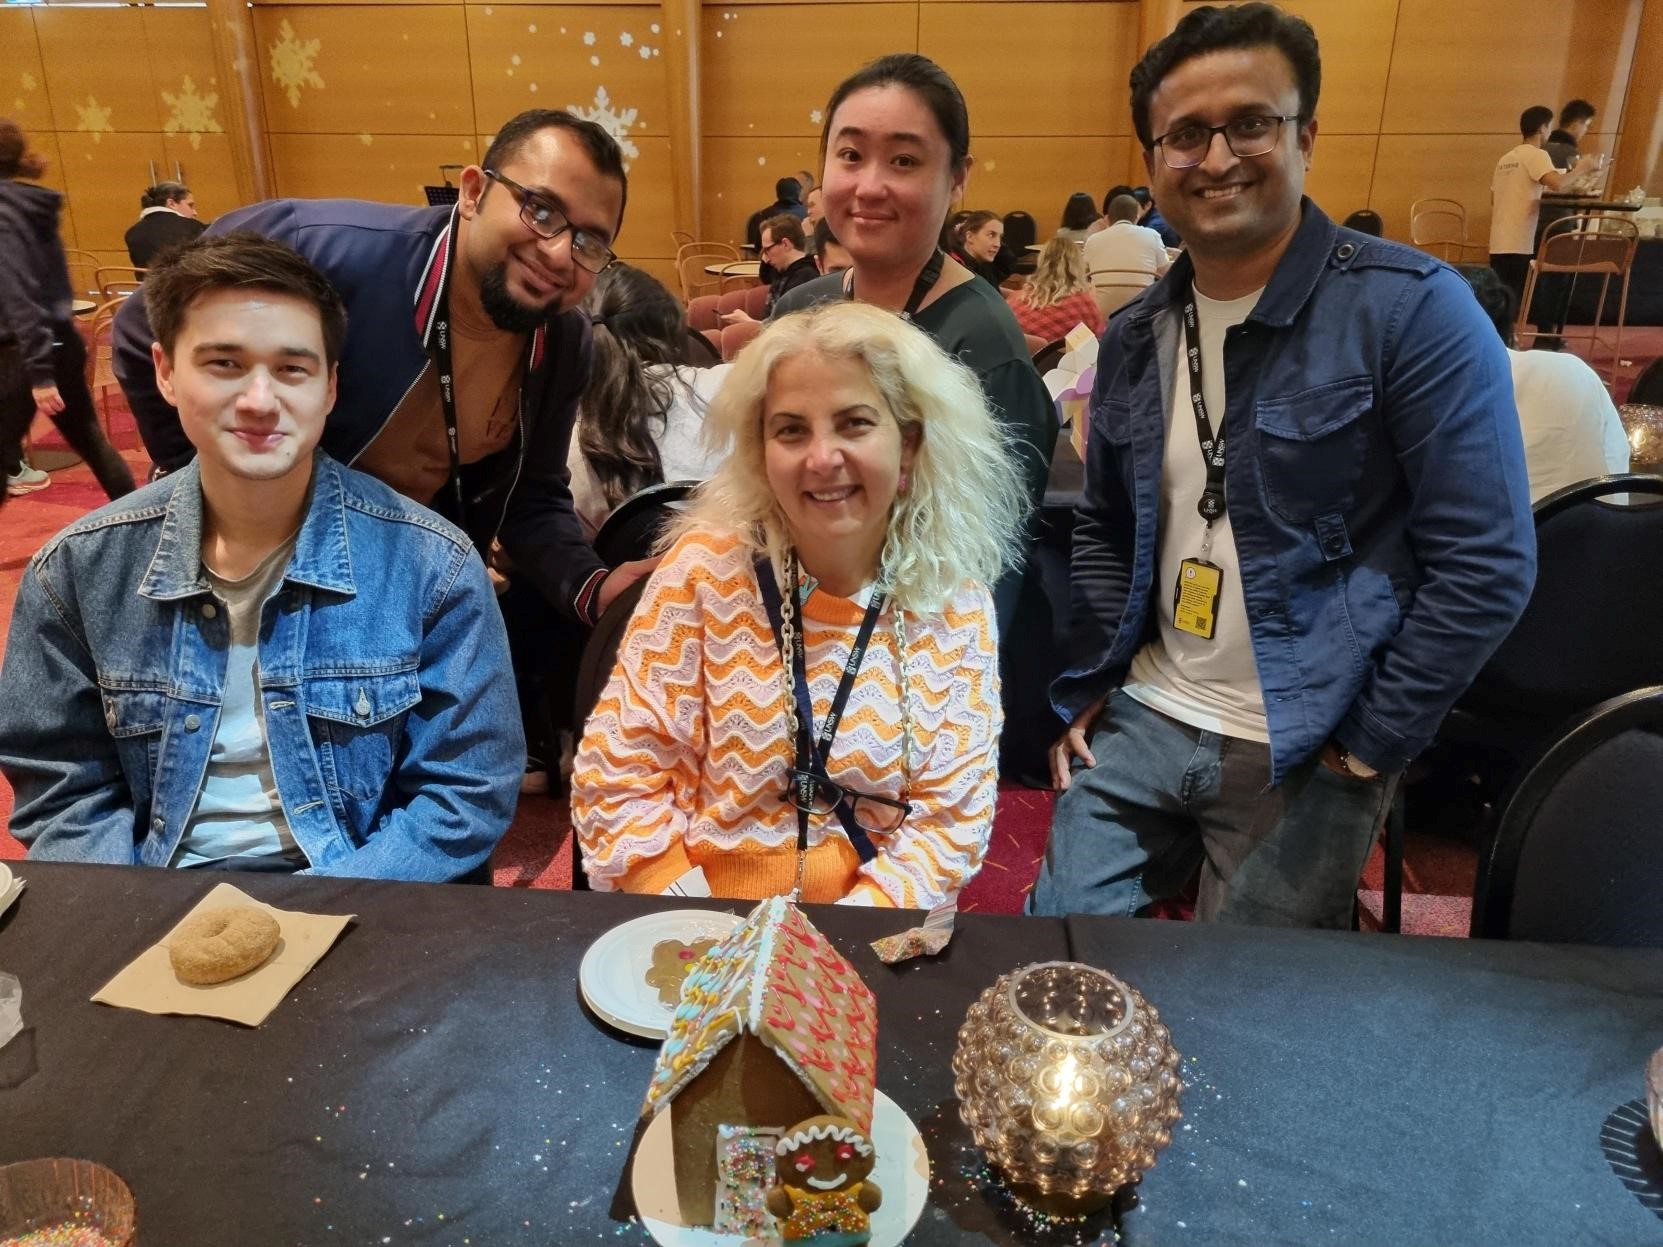 A group of UNSW staff with a gingerbread house